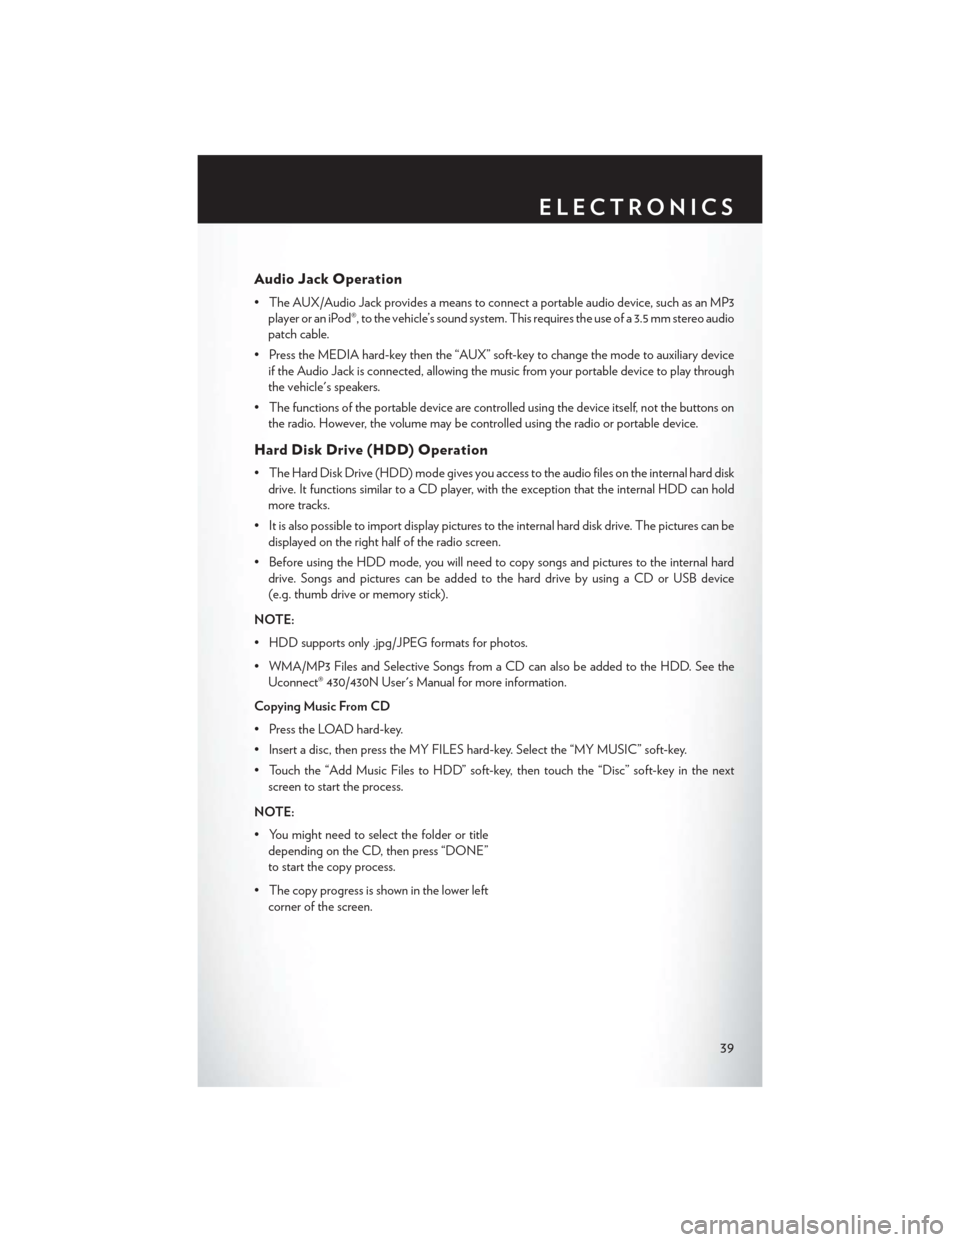 CHRYSLER 200 2014 1.G Service Manual Audio Jack Operation
• The AUX/Audio Jack provides a means to connect a portable audio device, such as an MP3player or an iPod®, to the vehicle’s sound system. This requires the use of a 3.5 mm s